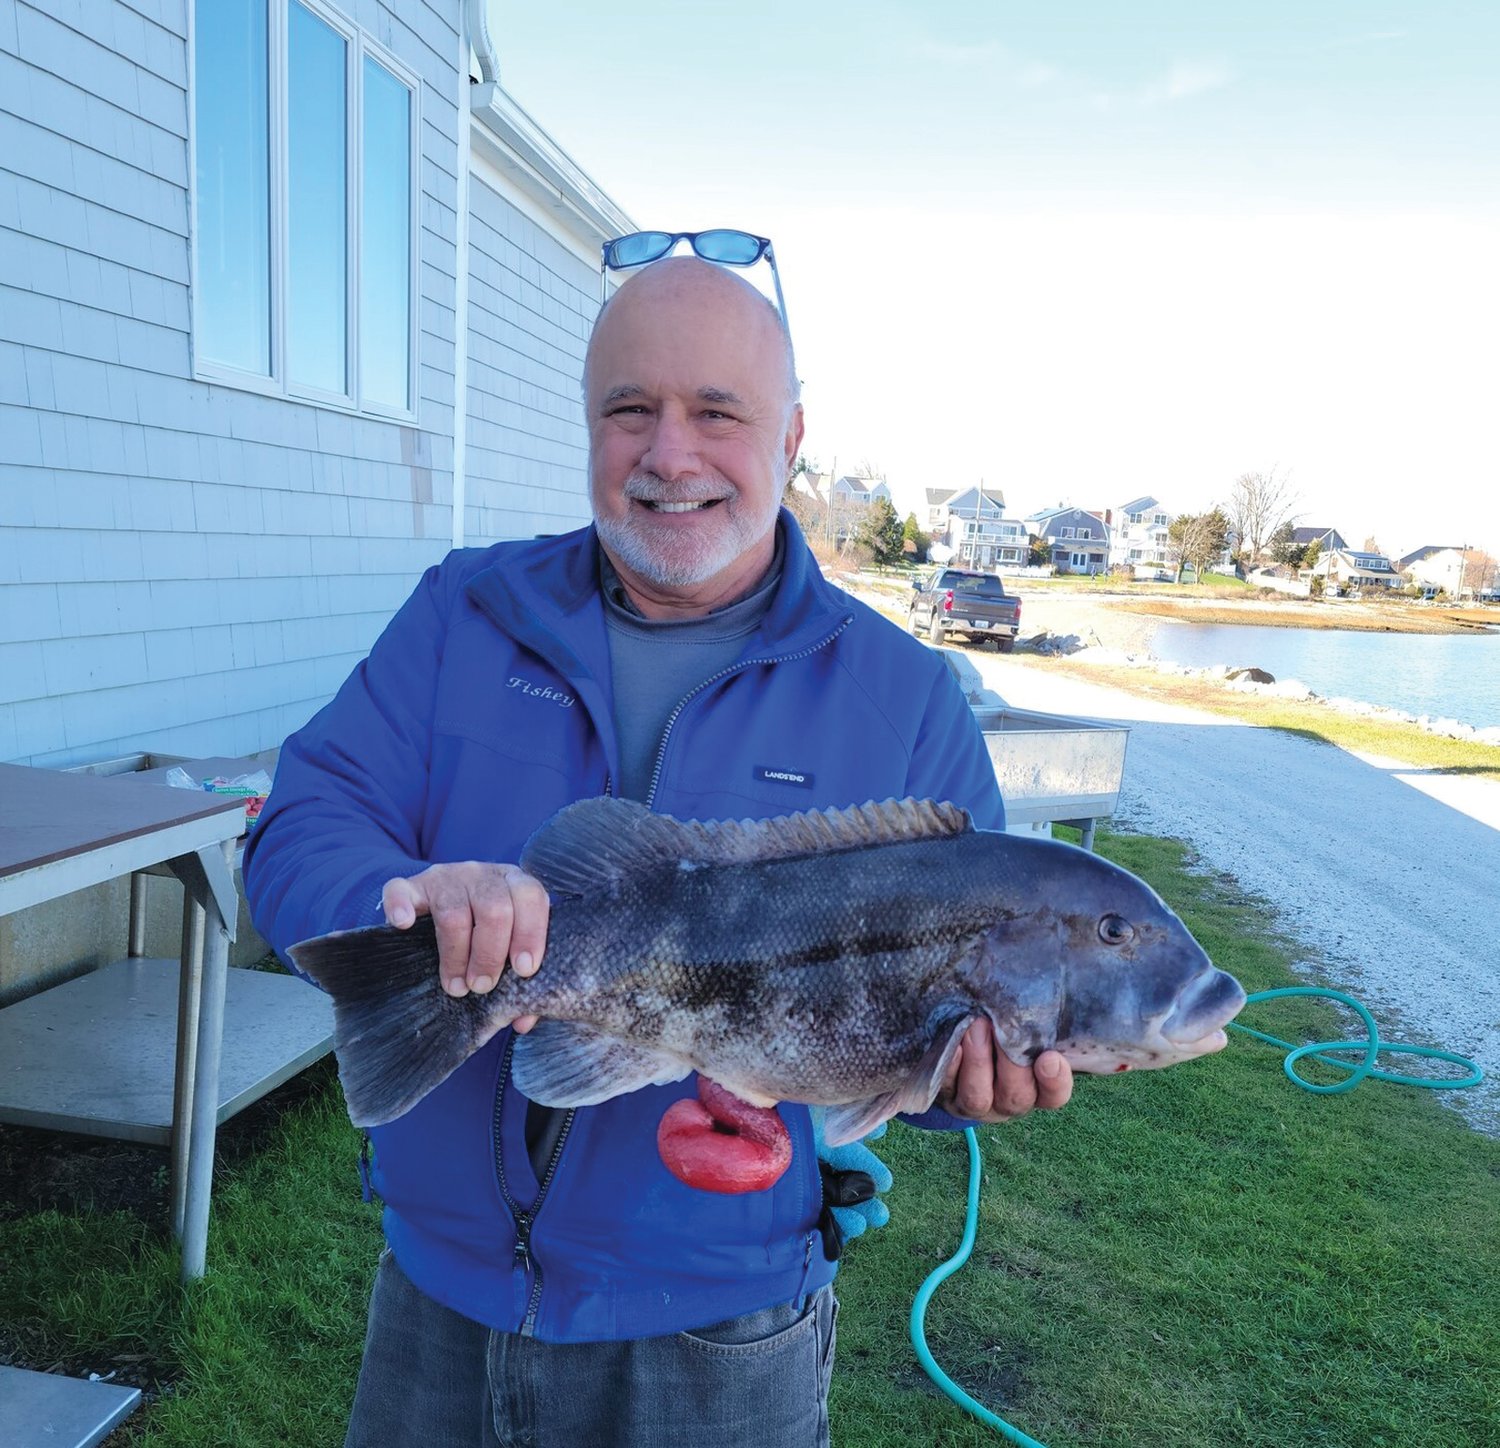 PERSONAL BEST: Angler Greg Spier of Portsmouth, RI with his personal best 9.35-pound tautog caught off Newport this weekend.